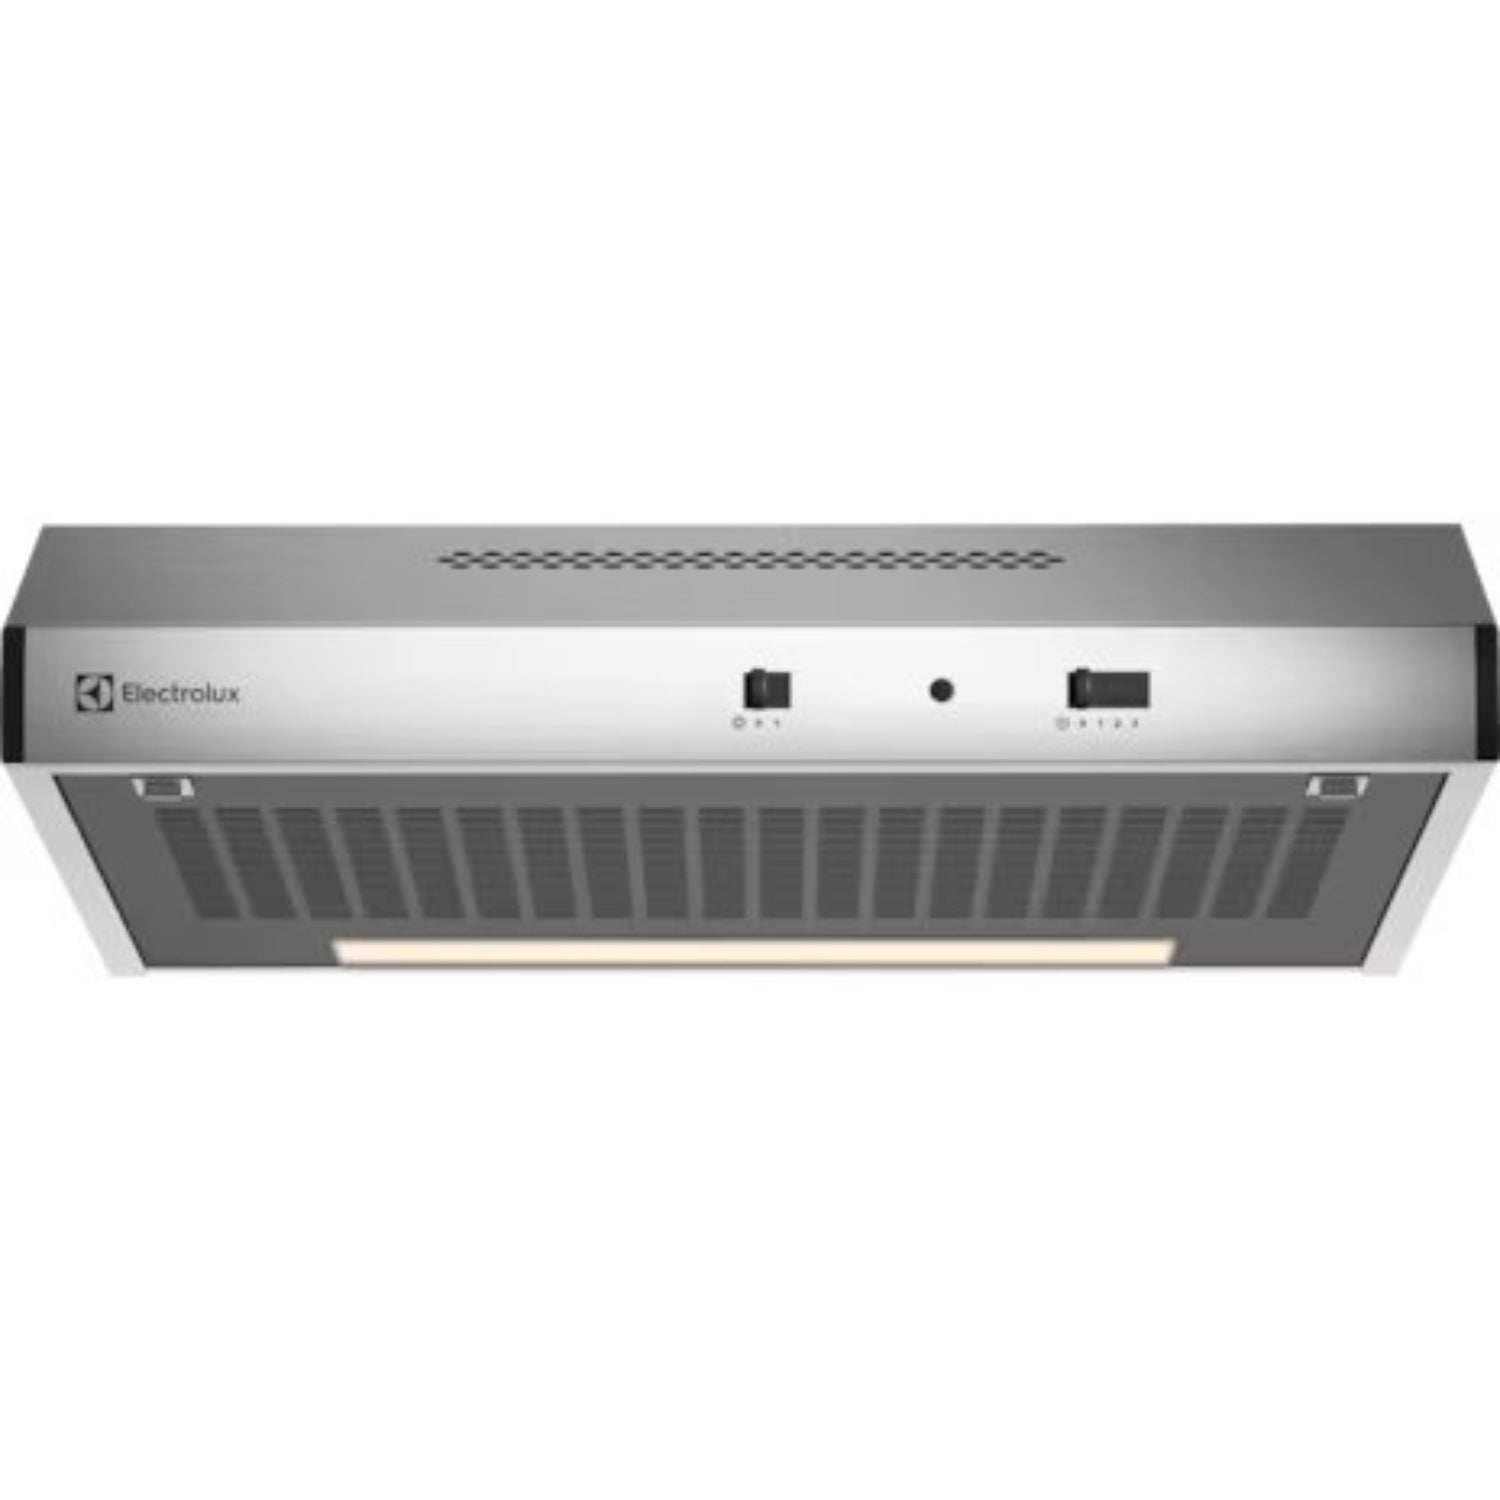 Electrolux 60cm Fixed Extractor Hood with 3 Speed Settings and Dishwasher-safe Filter, Stainless Steel